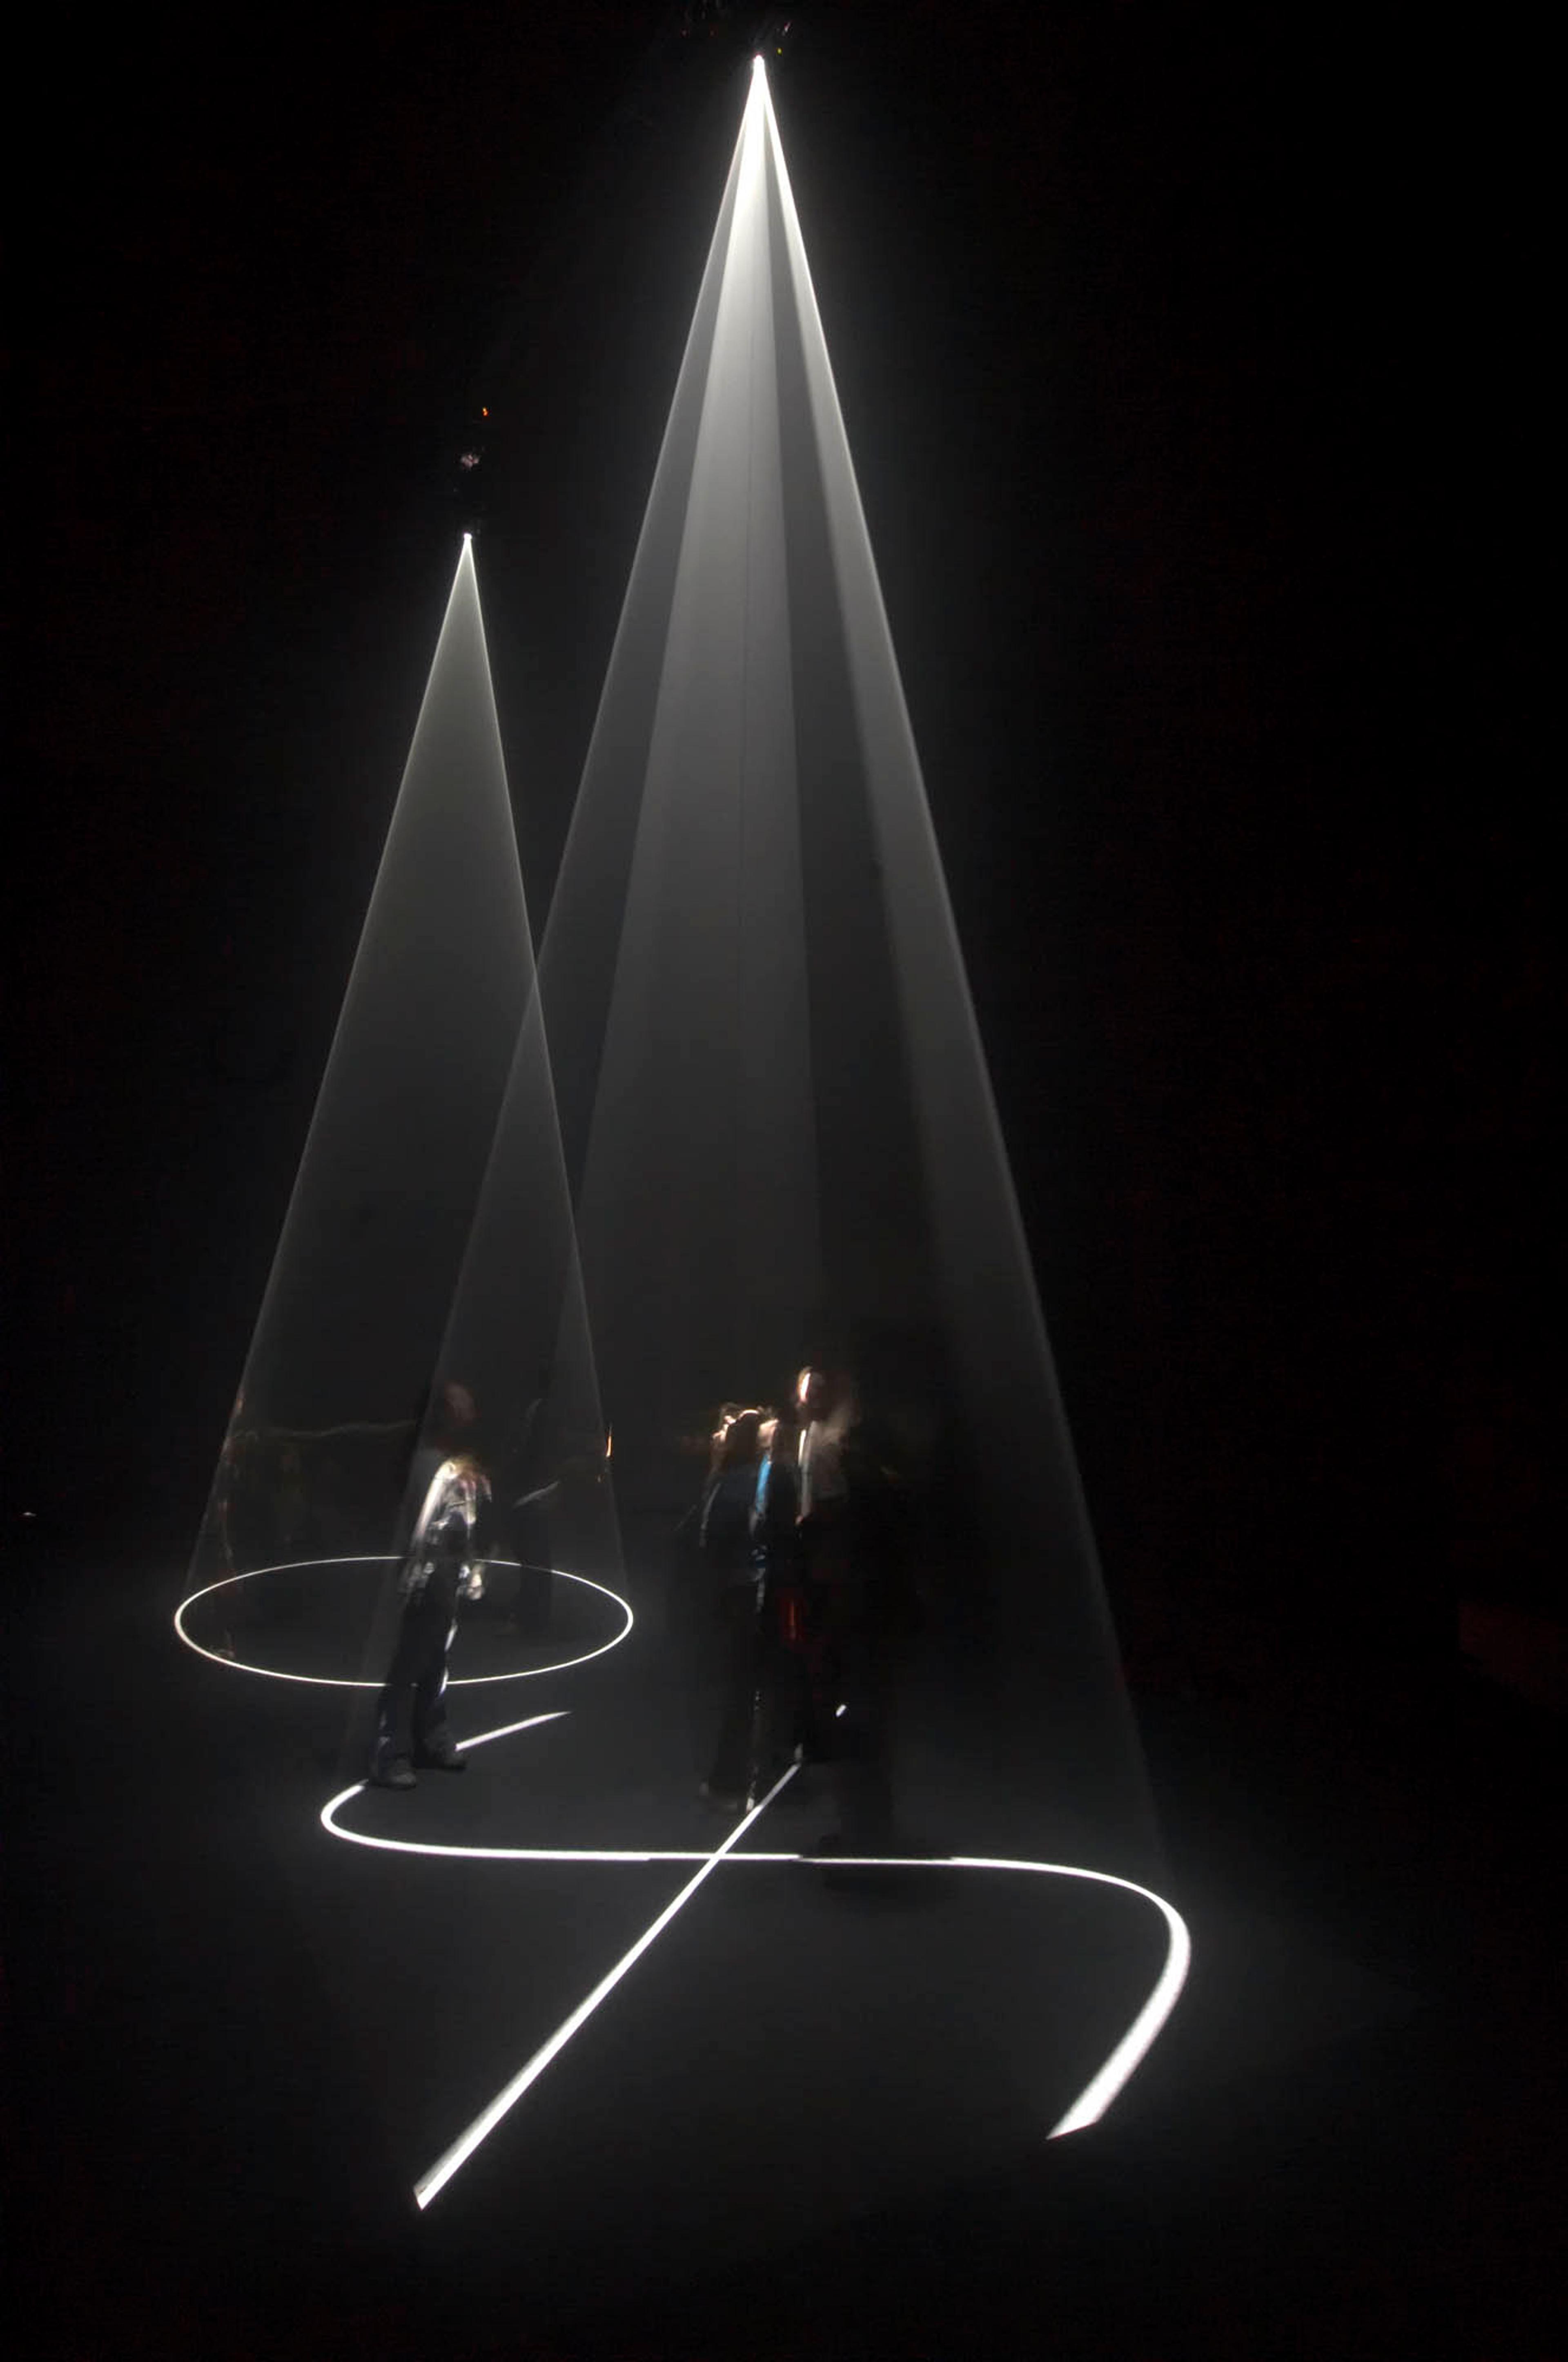 (2007) Anthony McCall, Between,You and I, 2006, light sculpture.